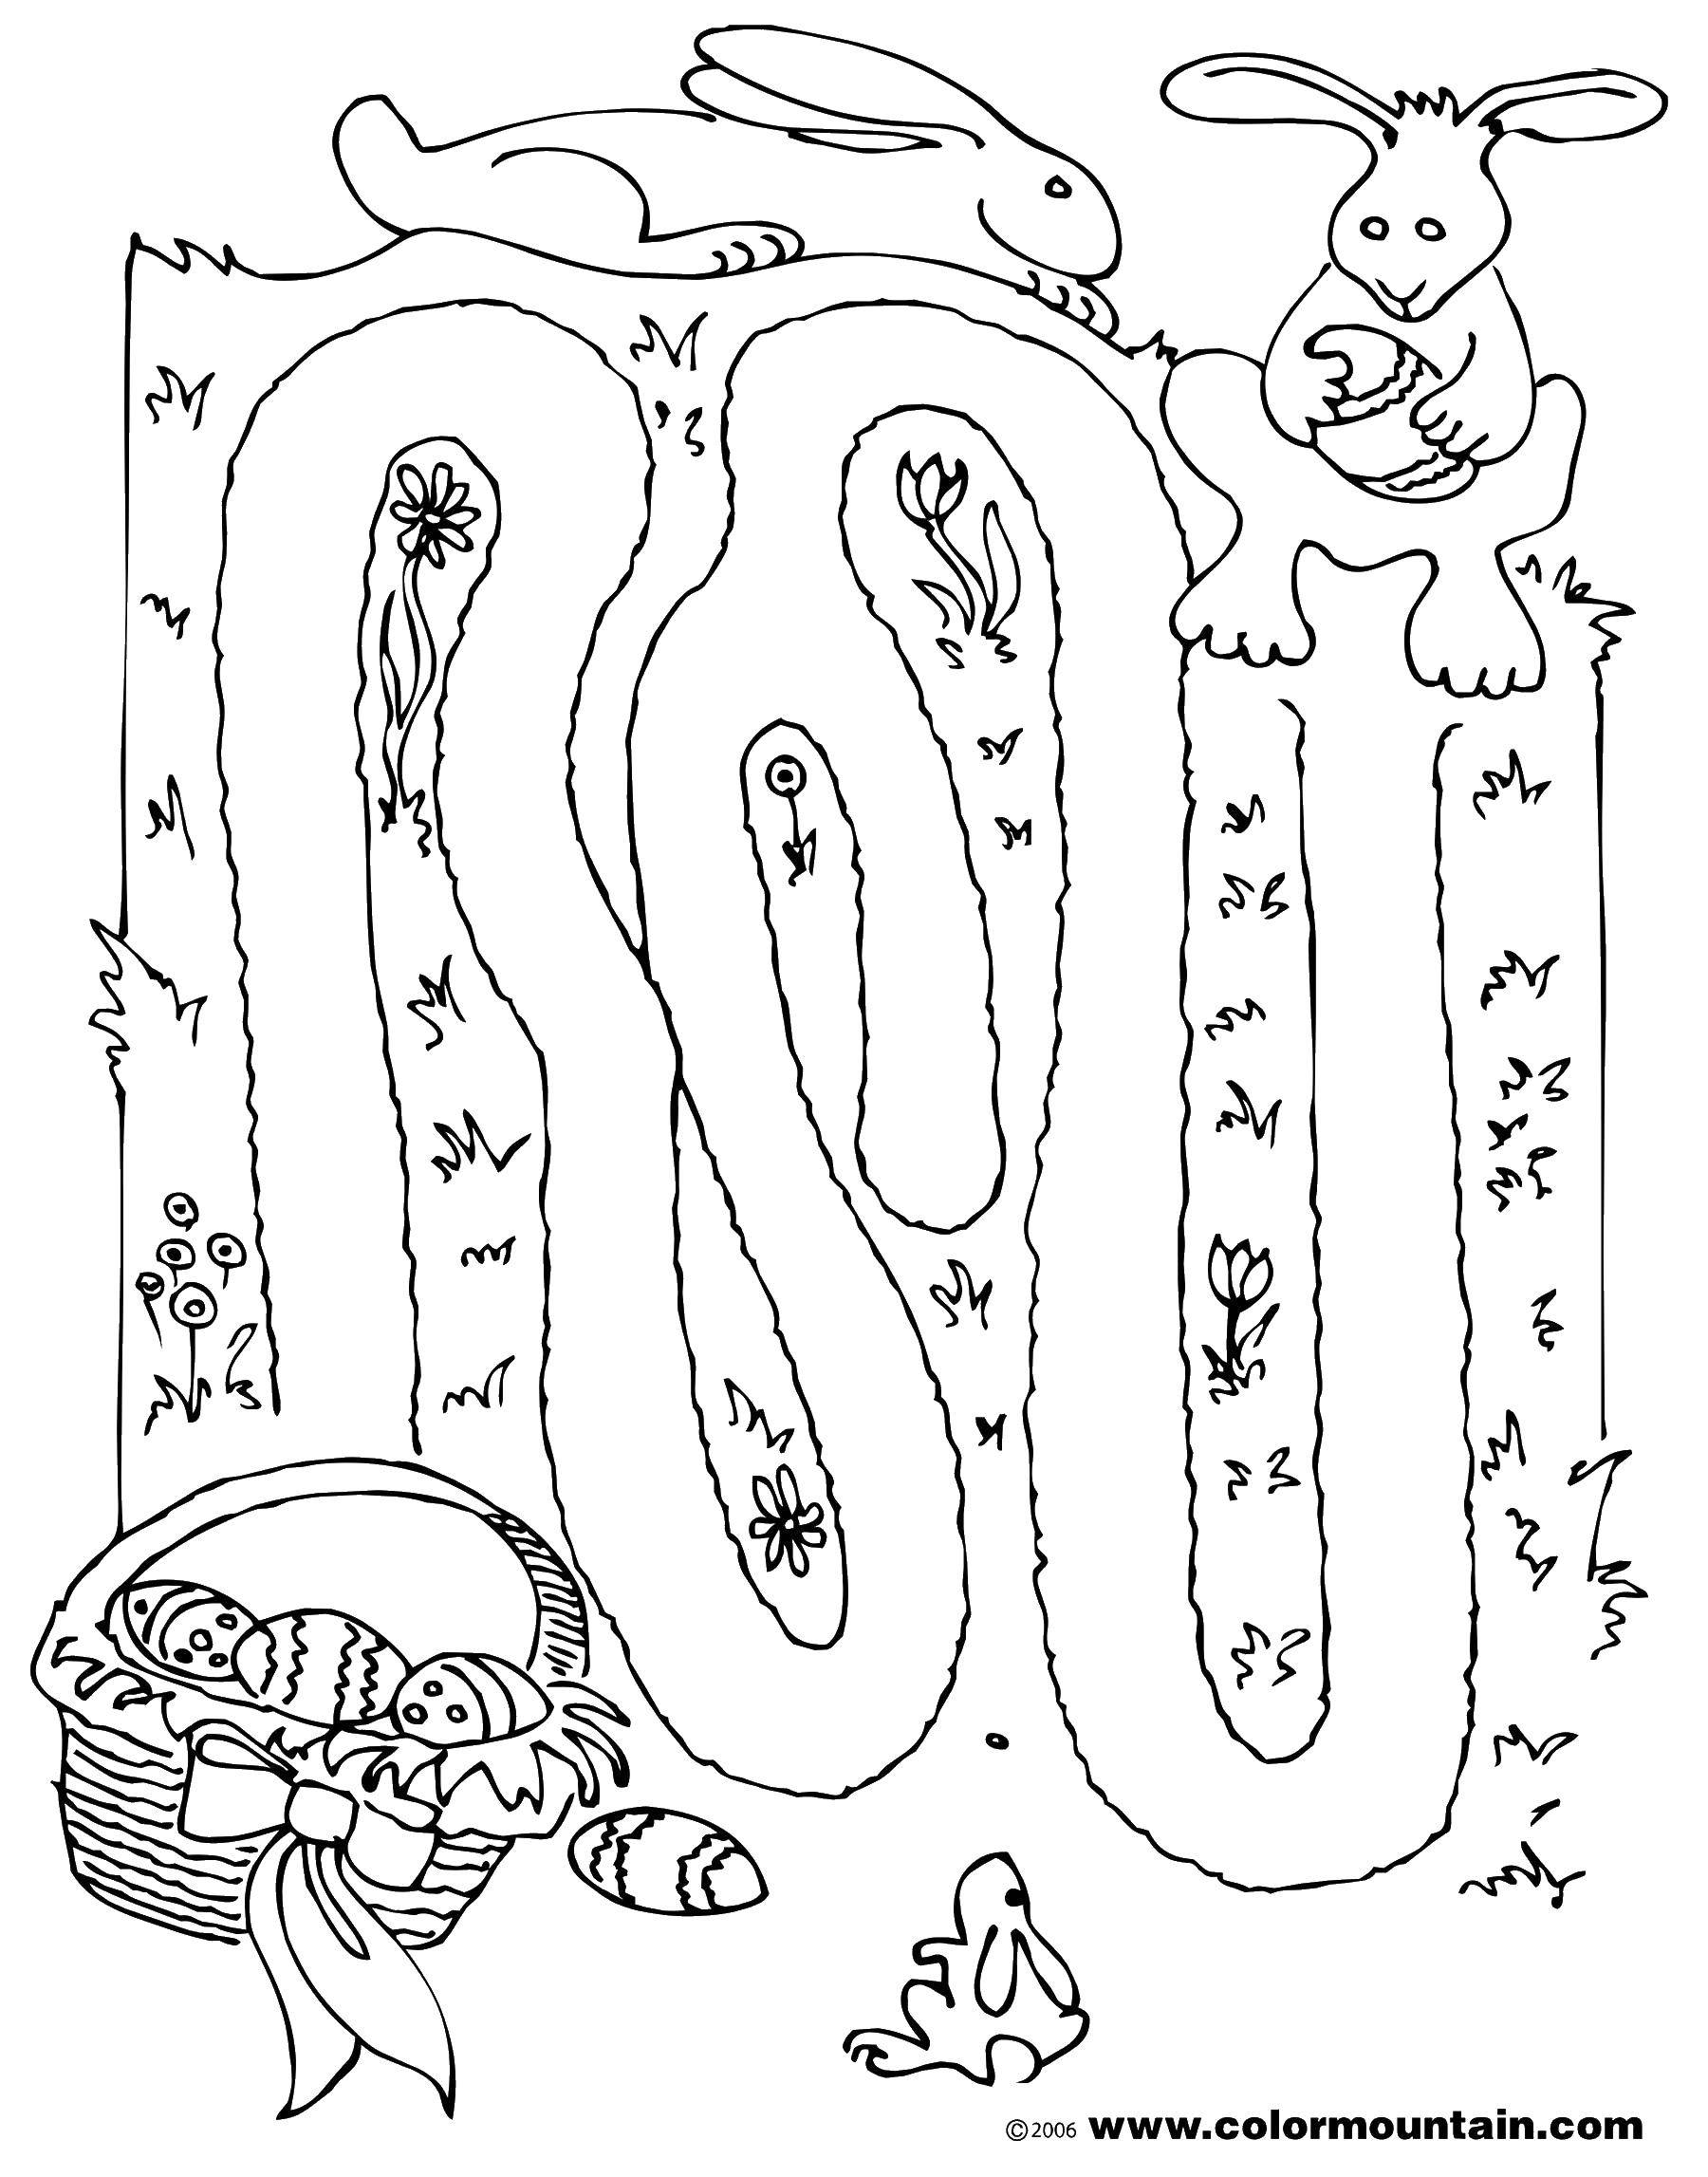 Coloring Maze, the Bunny. Category Mazes. Tags:  maze, mazes, bunnies.